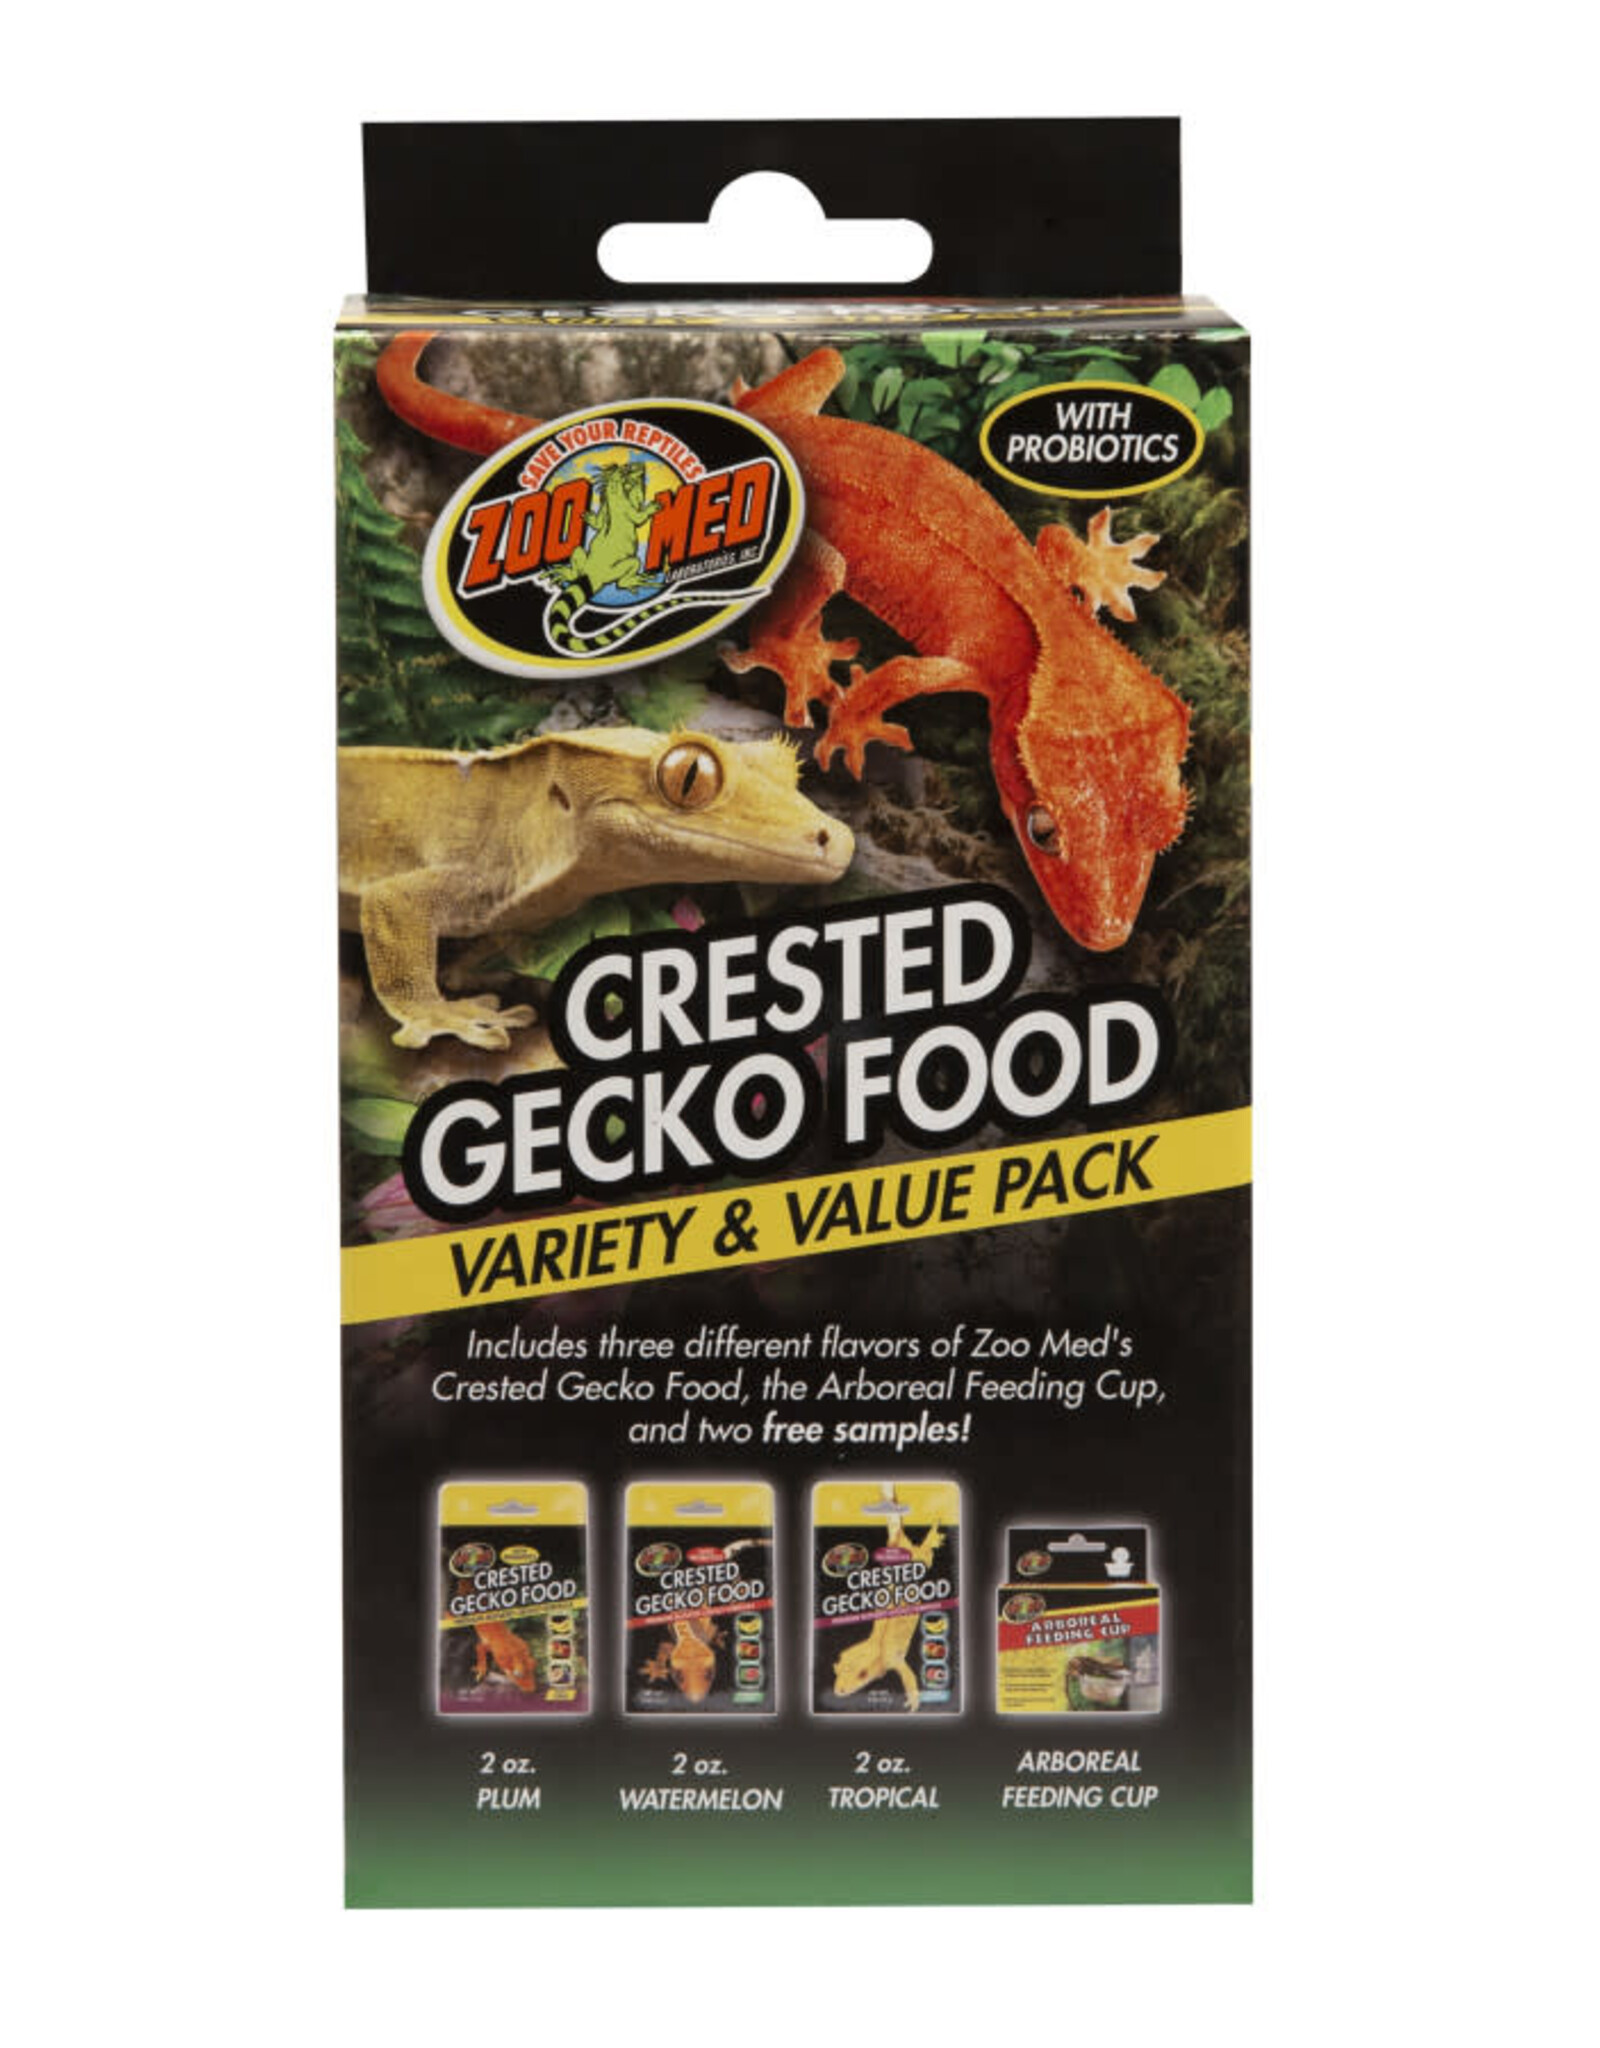 ZOO MED LABORATORIES, INC. ZOO MED- FSP-5- CRESTED GECKO DIET- 4X2X6- VALUE PACK- 3 VARIETIES (6 OZ) + ARBOREAL FEEDER CUP